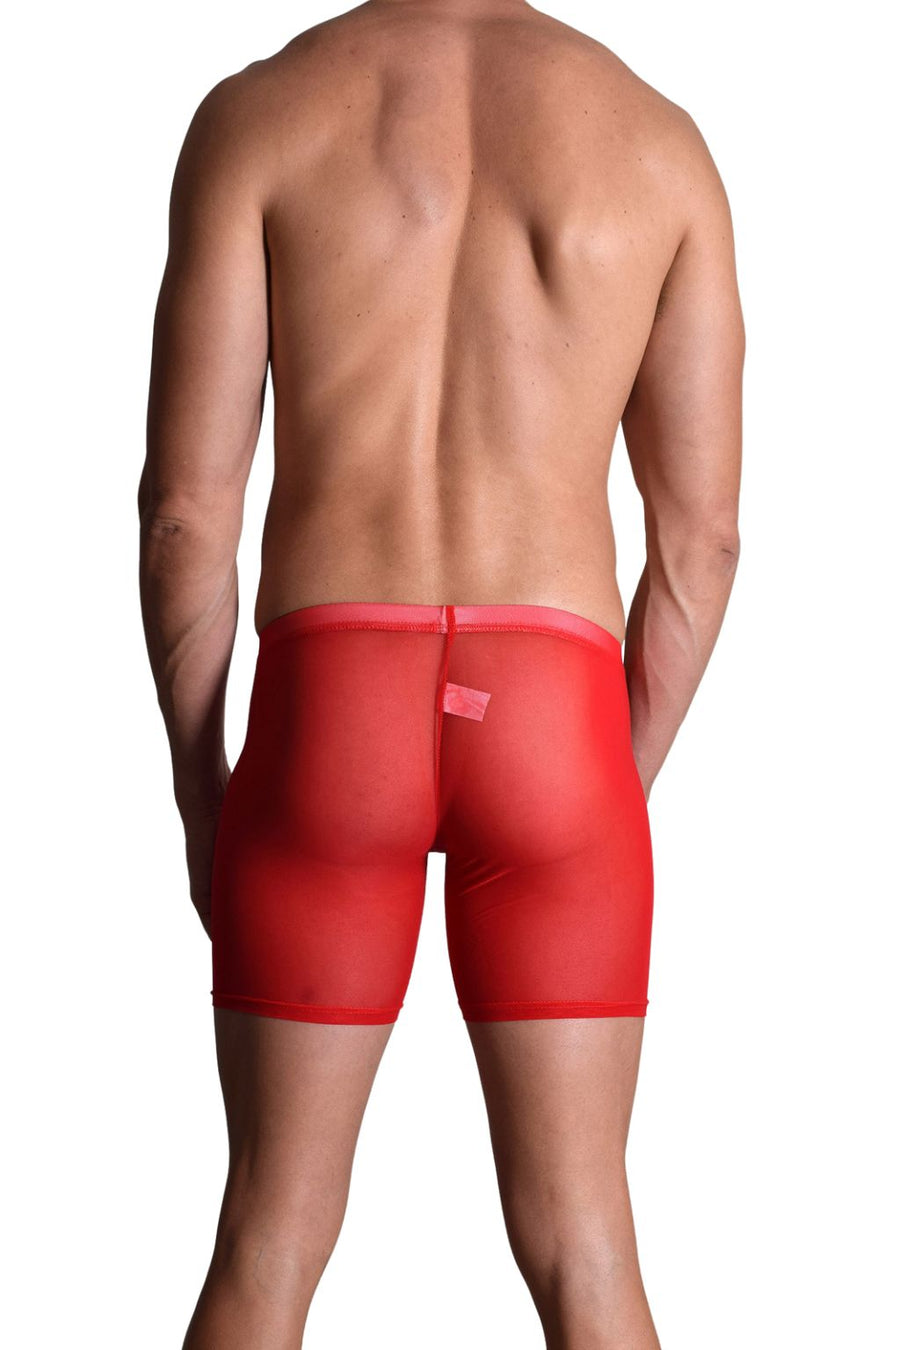 Bodywear for Men Ultra Sheer High Waist Boxer Shorts #BfM-1042 made from a fine poly blend sheer material. Our Sheer Boxer shorts sit high on your waist, 4' long legs, seamless front with a center seamed rear in Red